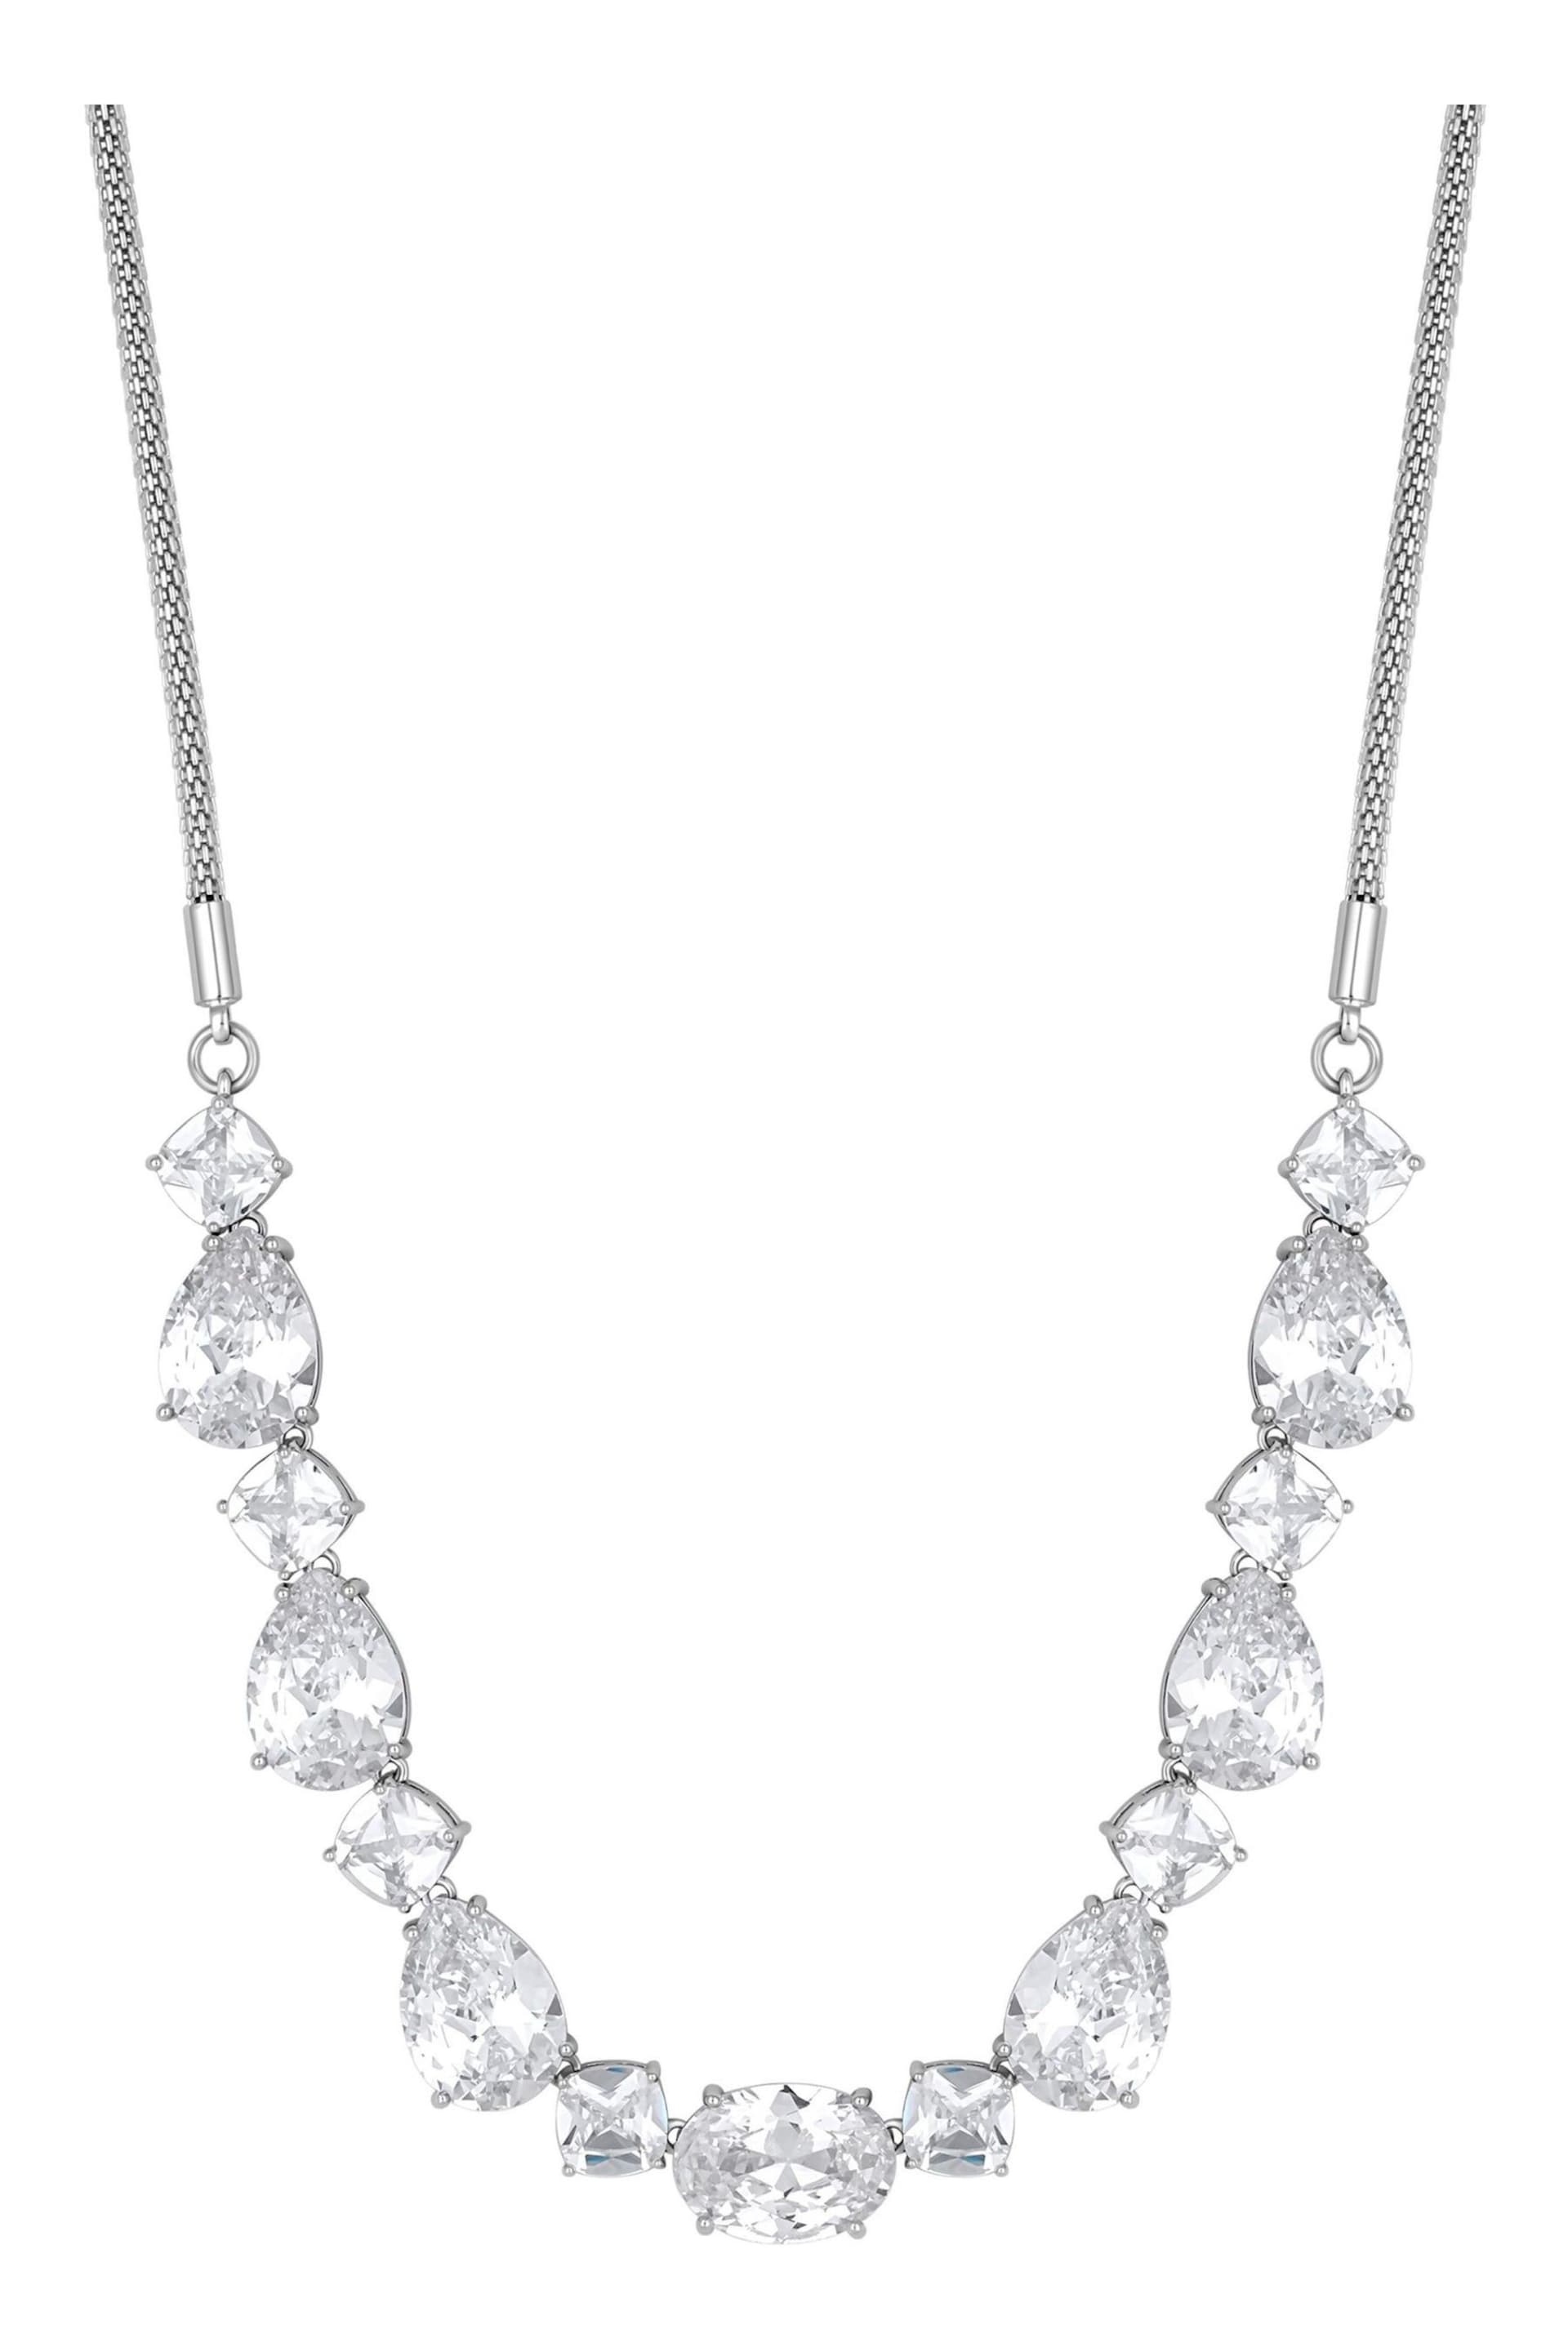 Jon Richard Silver Cubic Zirconia Mixed Stone Necklace - Gift Boxed - Image 4 of 4